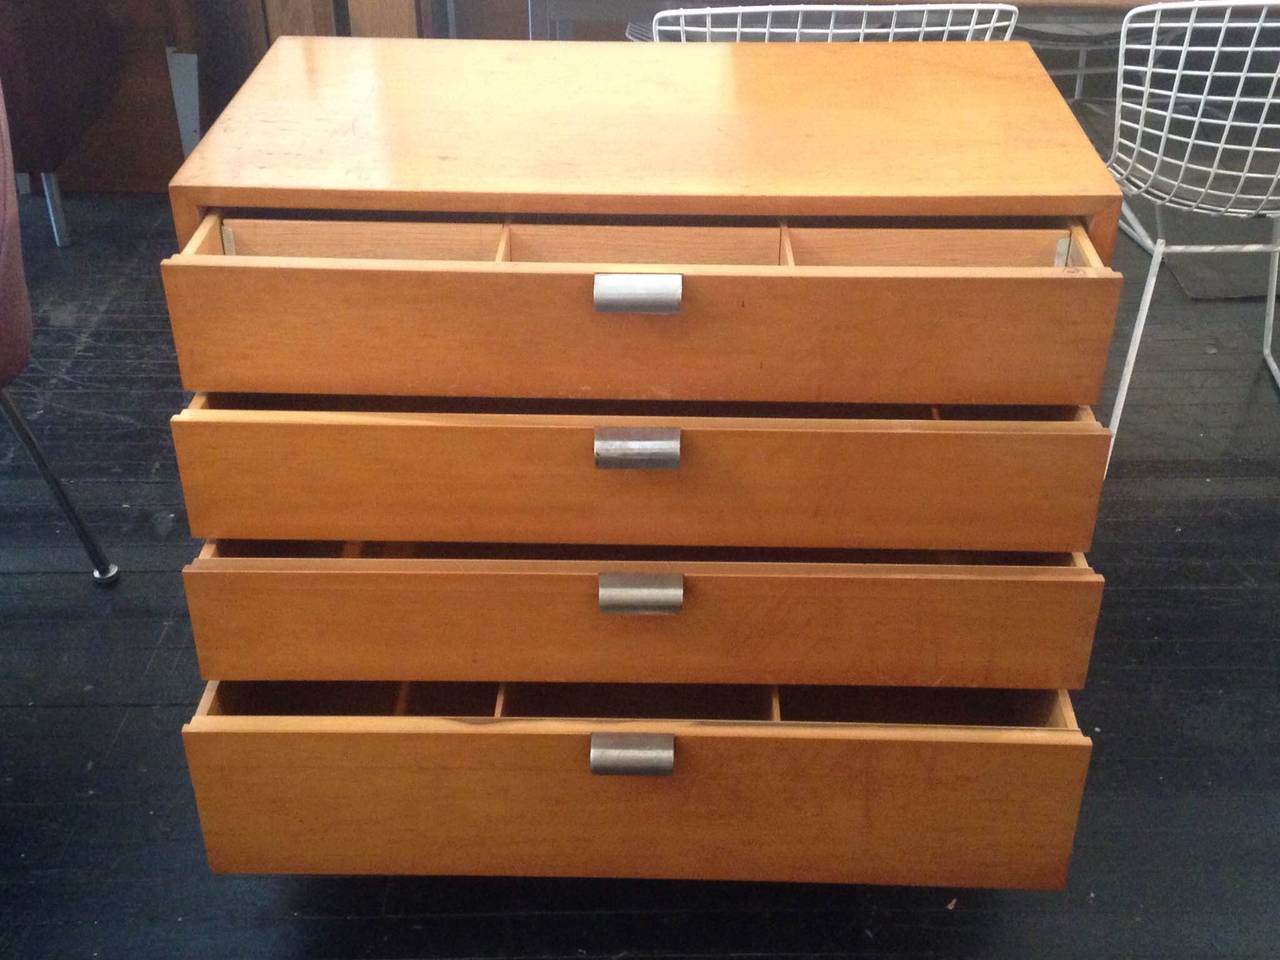 Four-Drawer Dresser designed by George Nelson for Herman Miller.
Maple with J pulls.